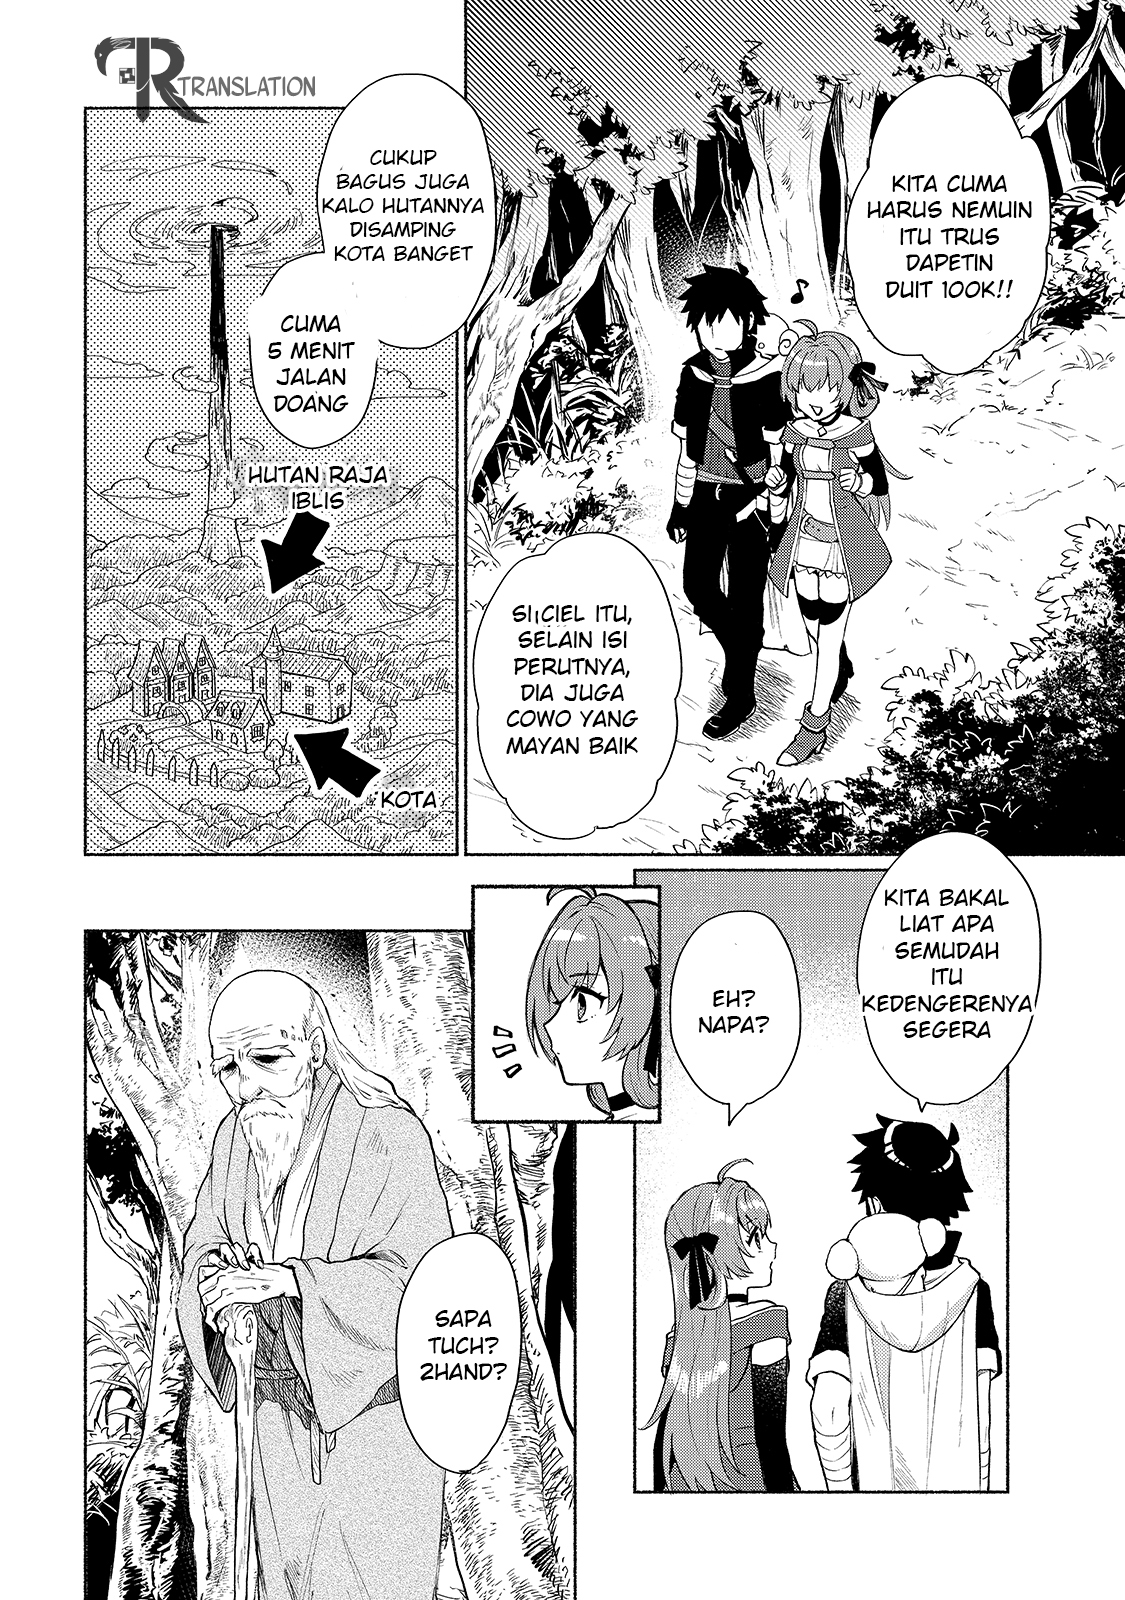 Dilarang COPAS - situs resmi www.mangacanblog.com - Komik when i was reincarnated in another world i was a heroine and he was a hero 005 - chapter 5 6 Indonesia when i was reincarnated in another world i was a heroine and he was a hero 005 - chapter 5 Terbaru 16|Baca Manga Komik Indonesia|Mangacan